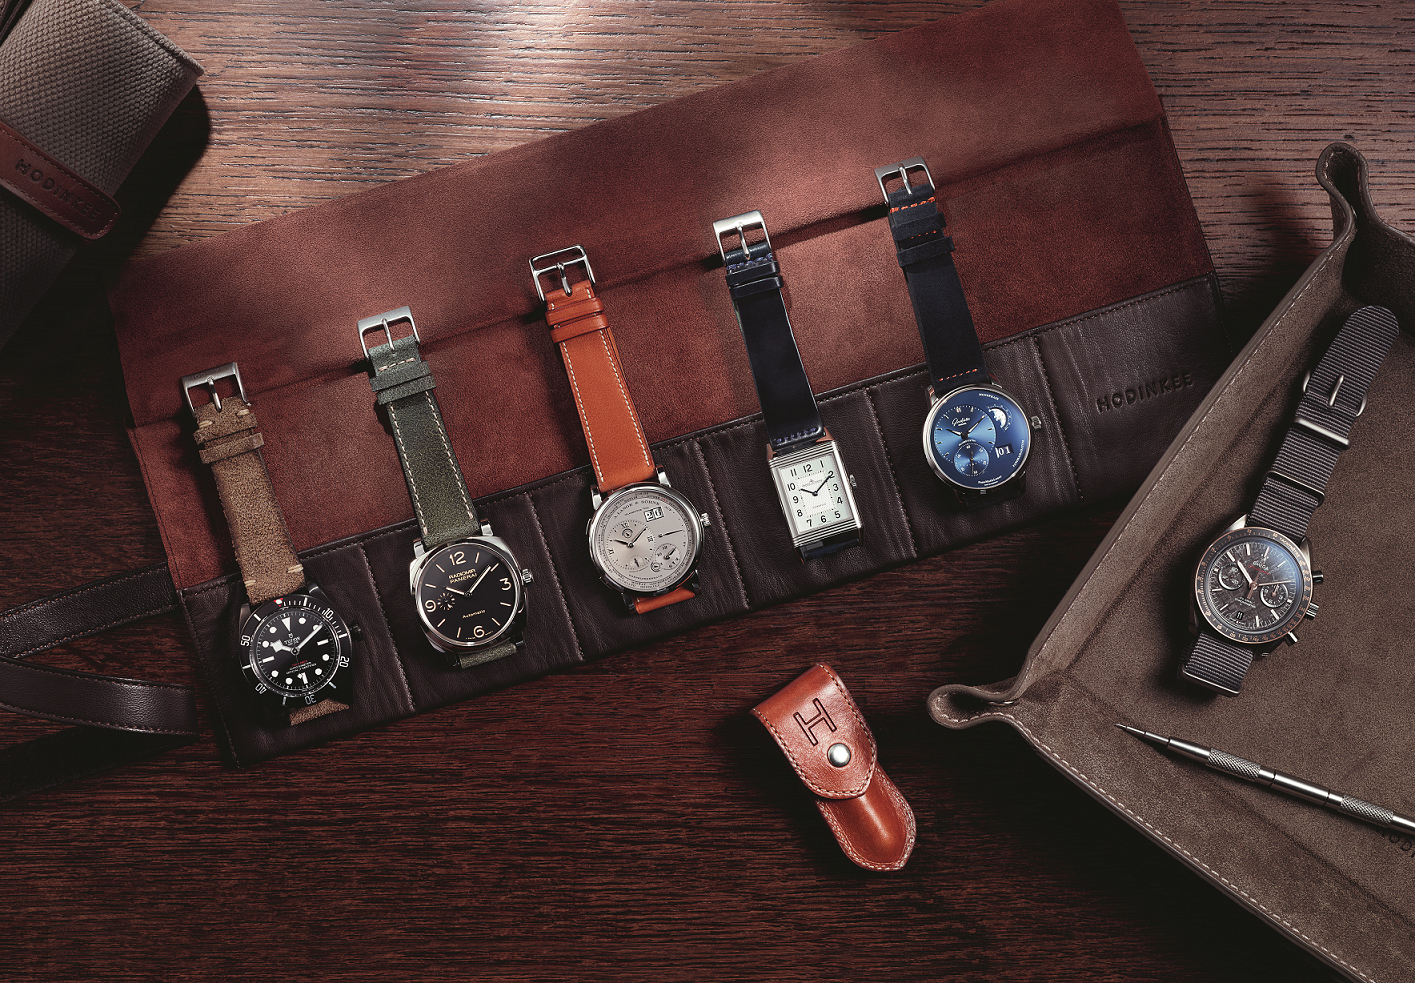 Ronny chieng hodinkee straps and watches